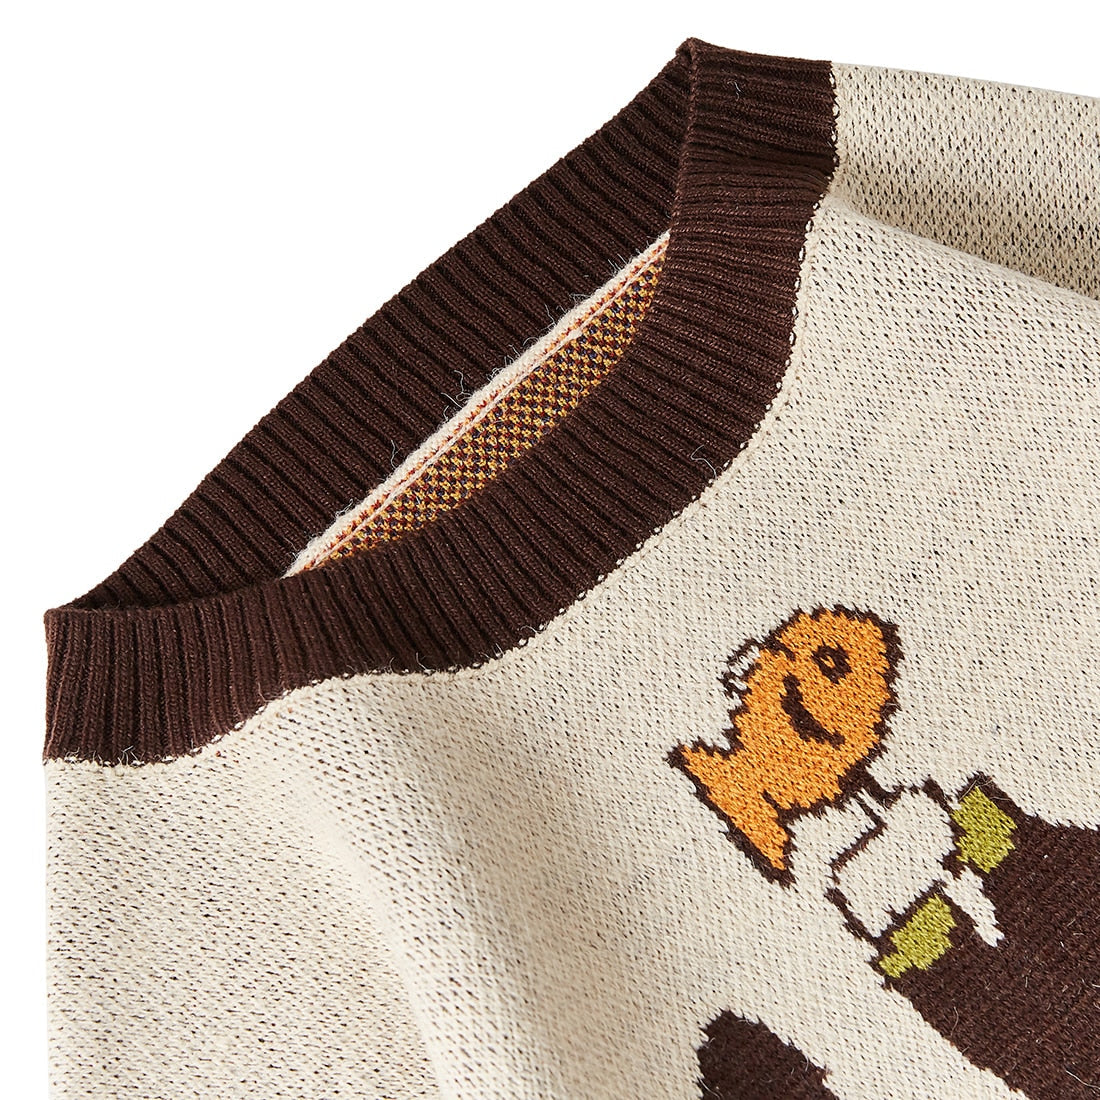 Get Cozy and Cute with the Cartoon Retro Cat Sweater